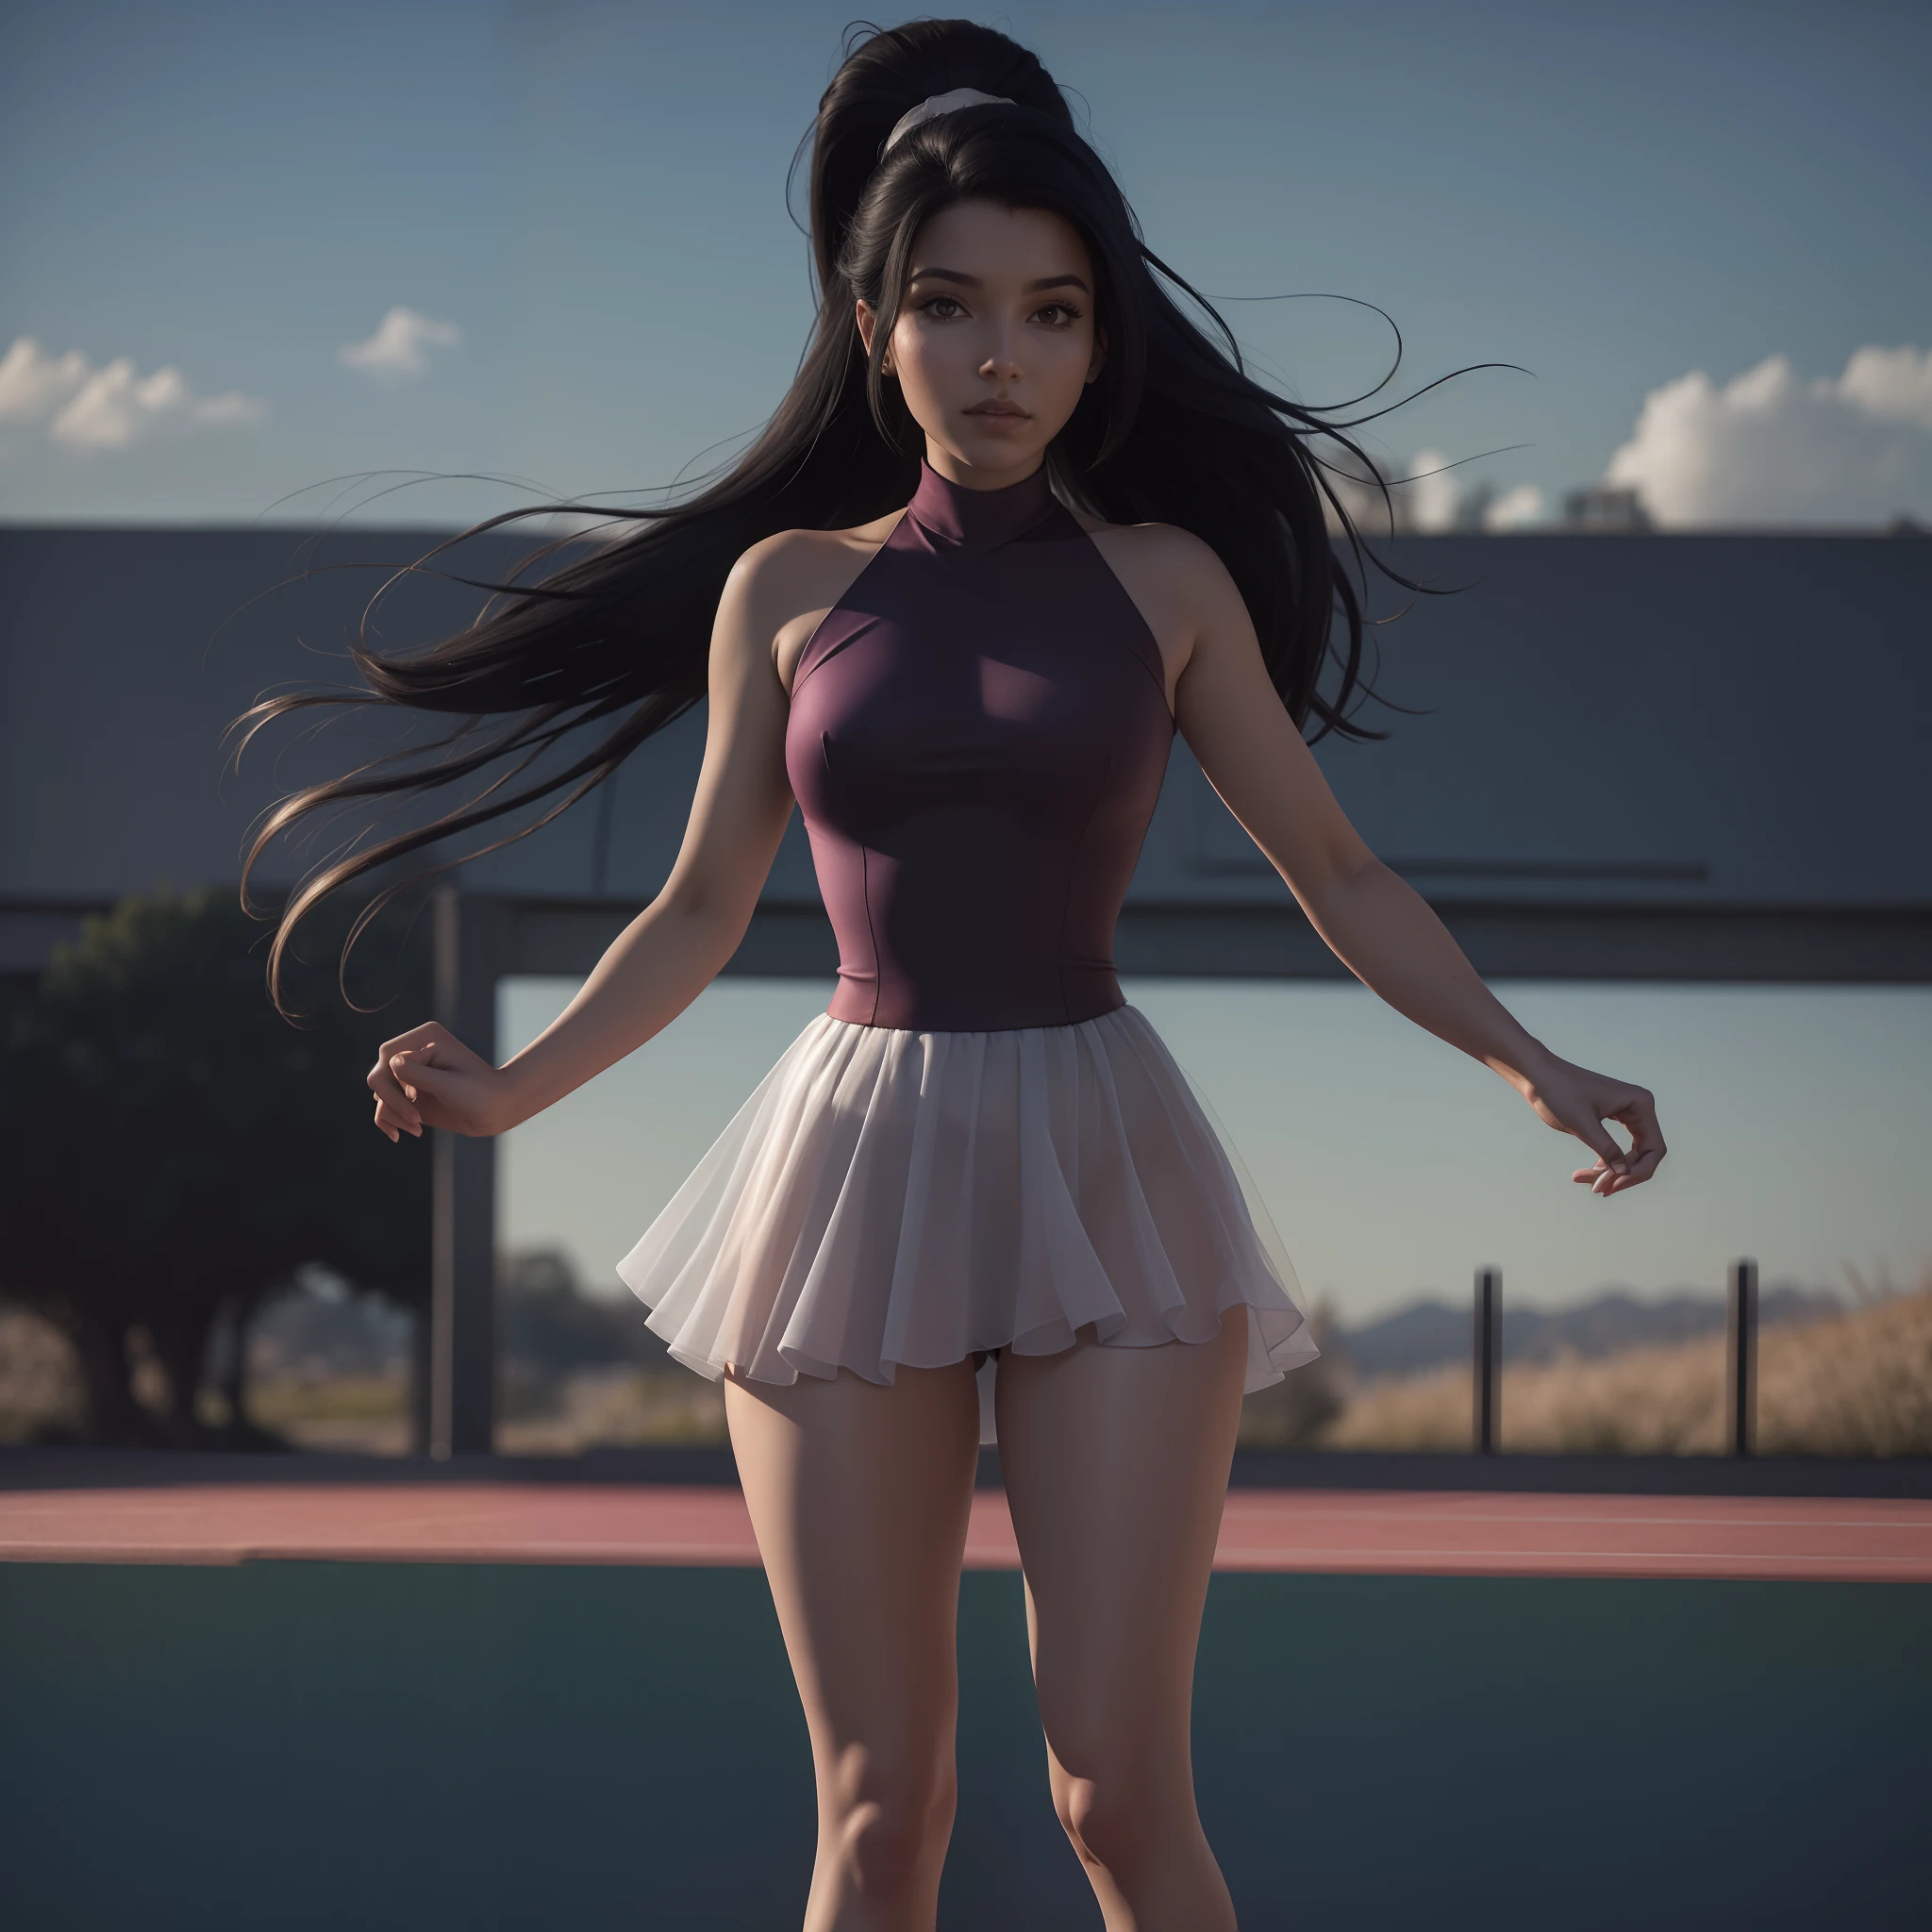 masterpiece, 4k, ultra high resolution, vidia with tennis suit and very short skirt with pleats, with legs open, sunny day, bare shoulders, ponytail, extreme long hair, Cherry Blossom, wet, transparent revealing suit, view from behind, looking back, Whole body, with beautiful legs sweating, sexy pose, very revealing